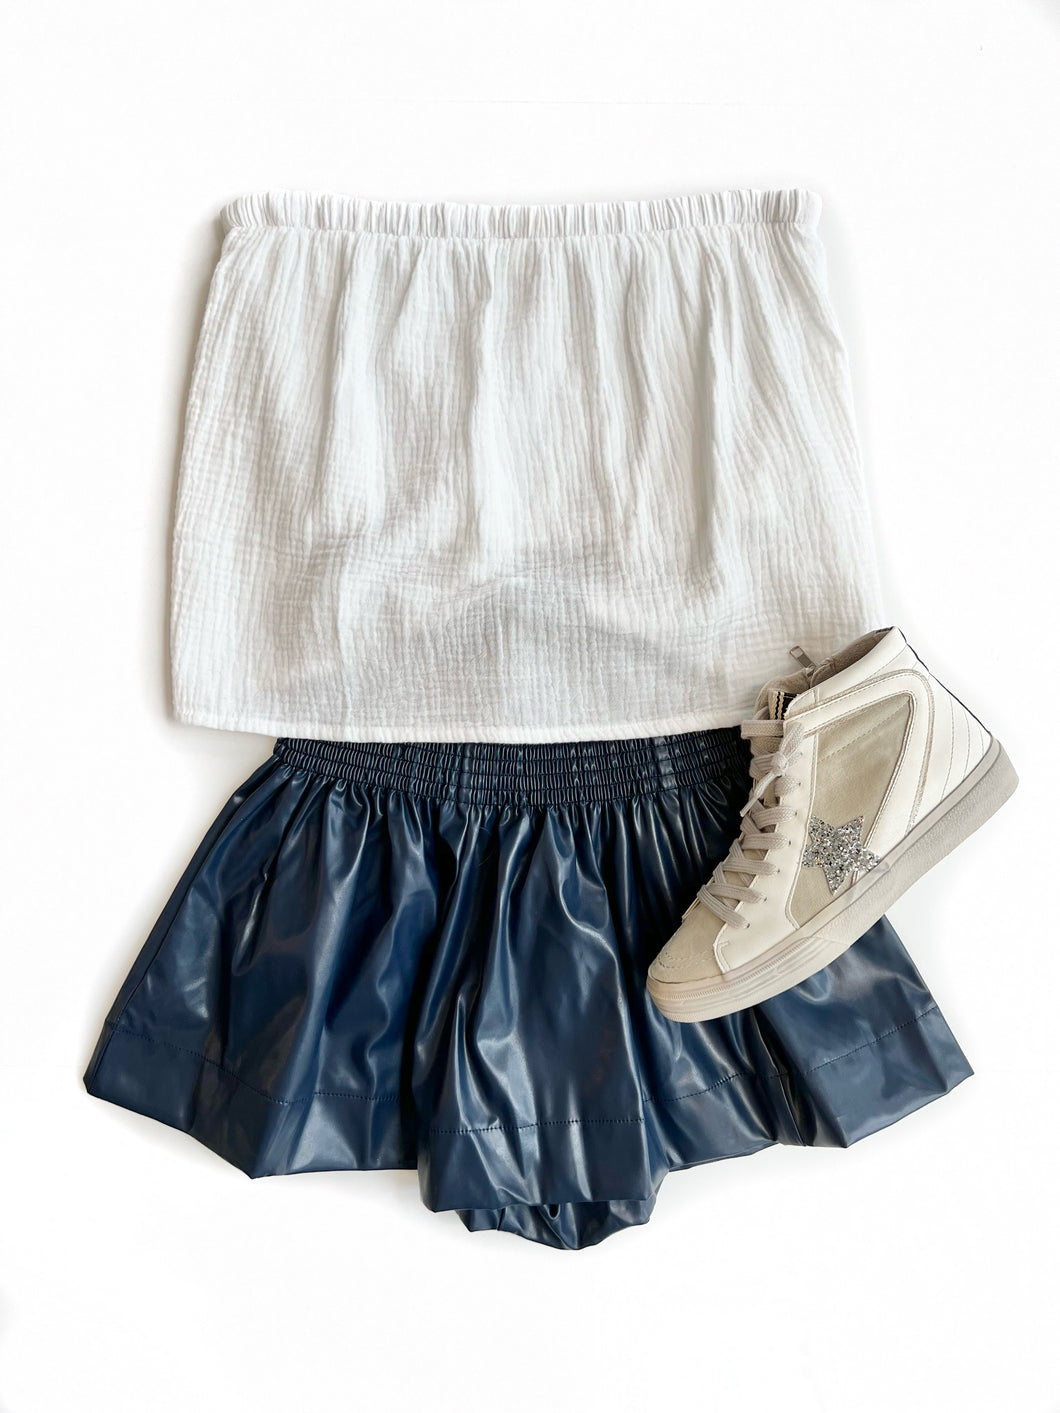 Leather Swing Short - Navy